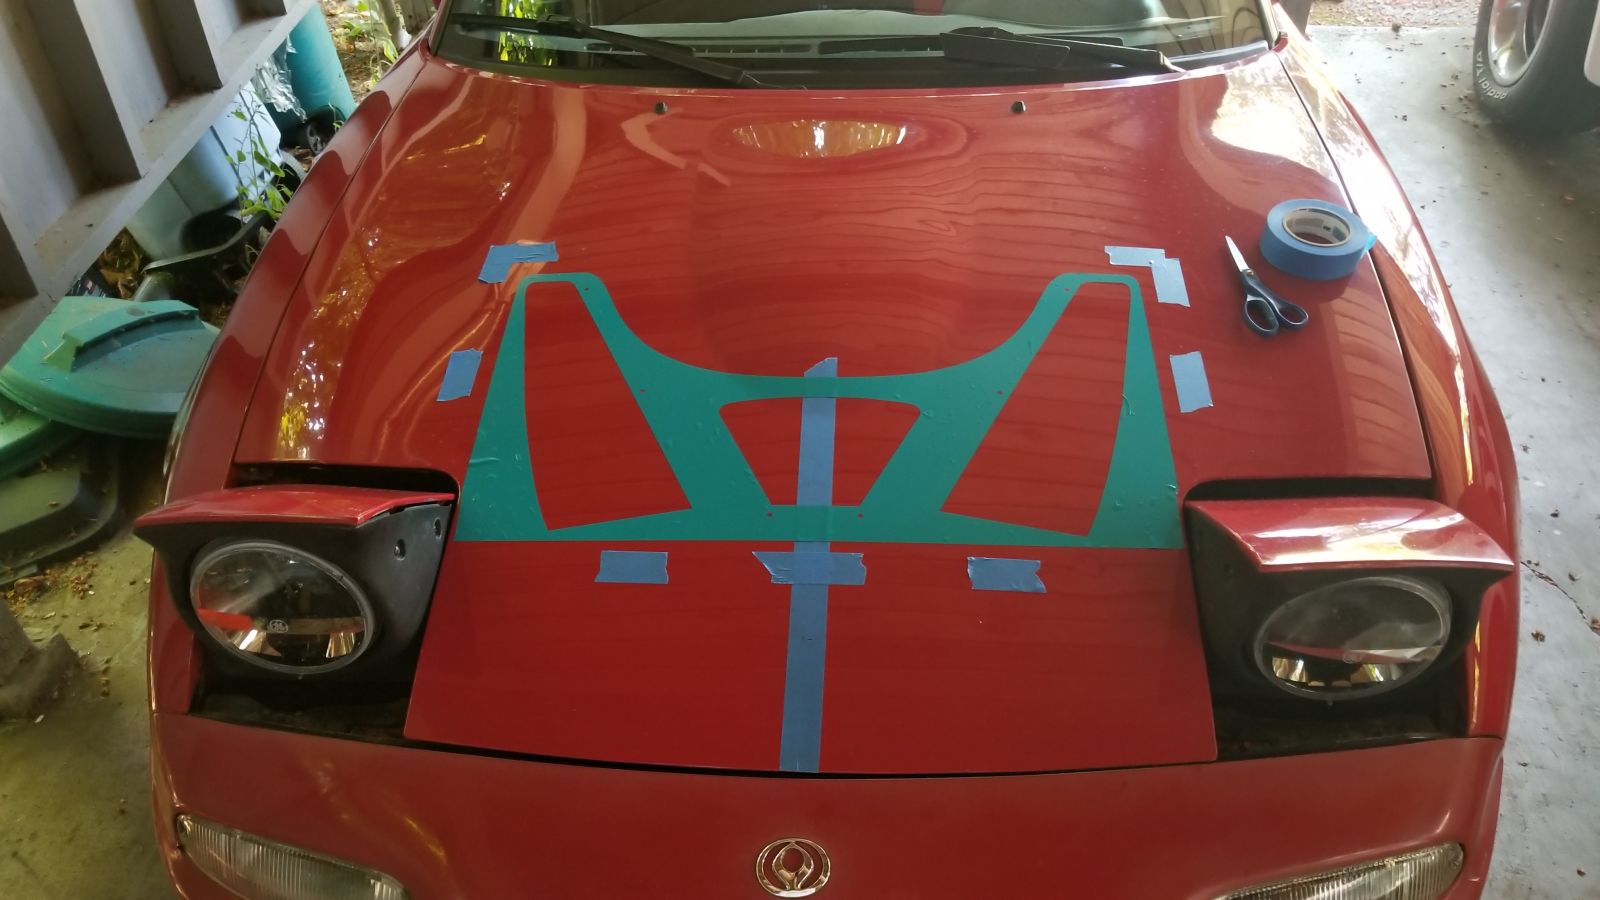 I *ALMOST* fucked up the decal irreversibly. Managed to save it, but there are definitely a couple creases and stretch marks